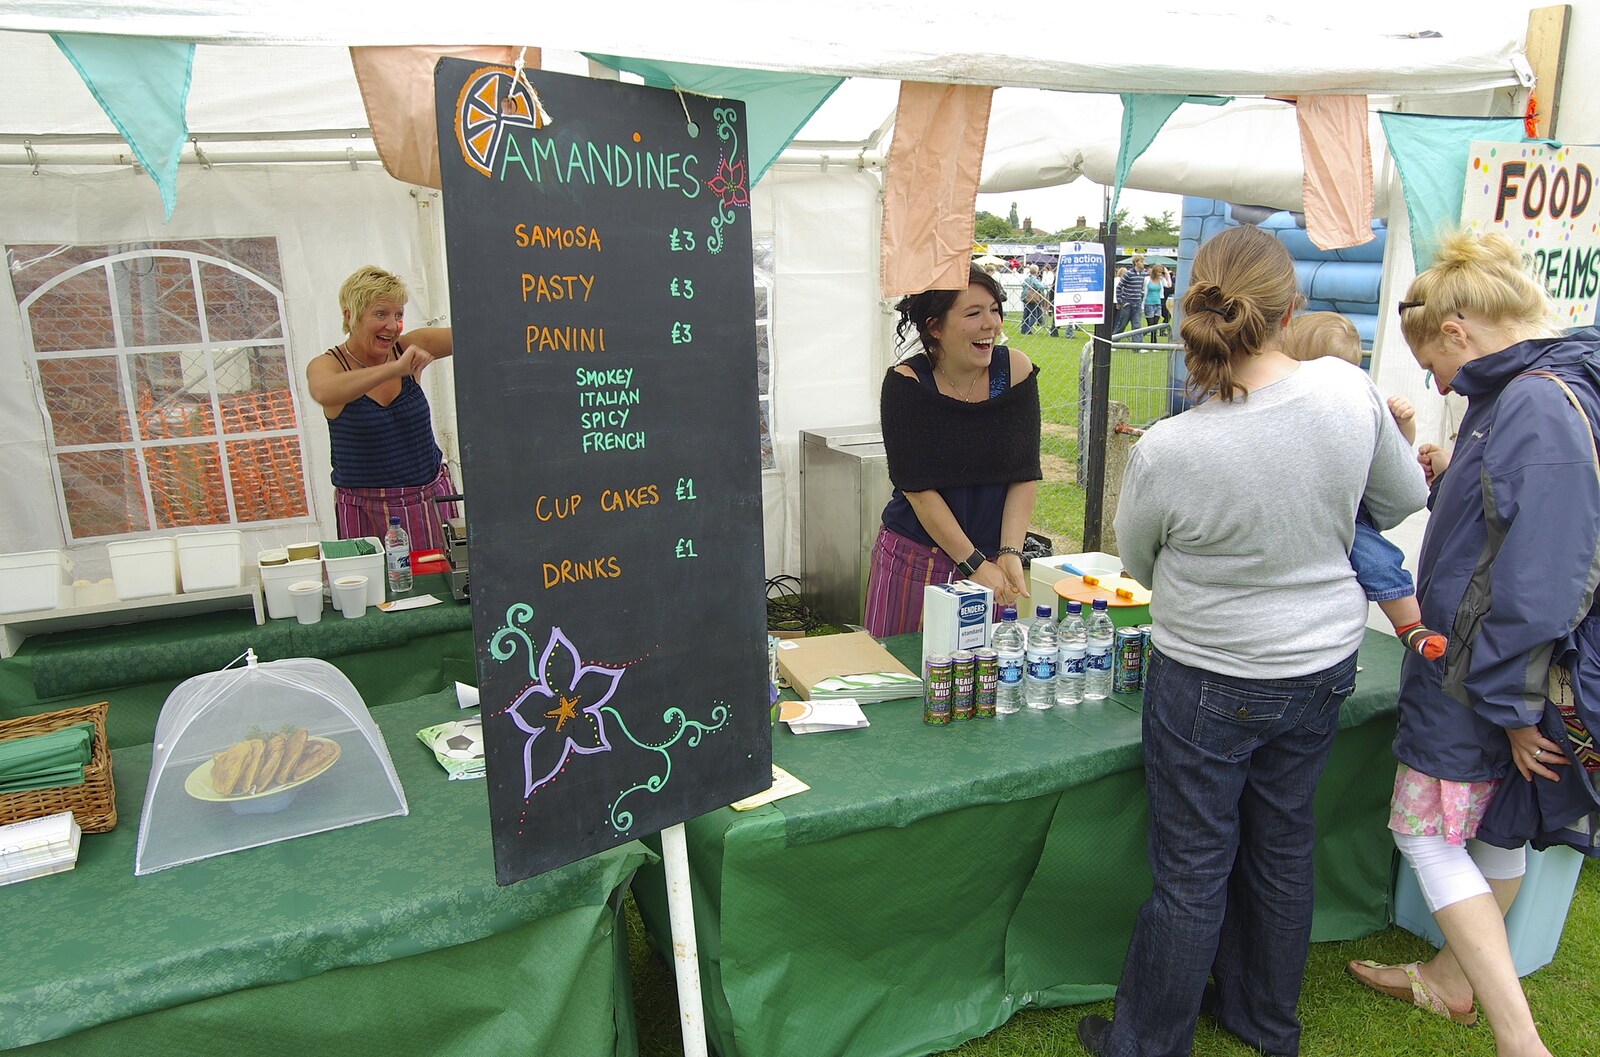 We visit the Amandines stand from Diss Carnival Procession, Diss, Norfolk - 21st June 2009